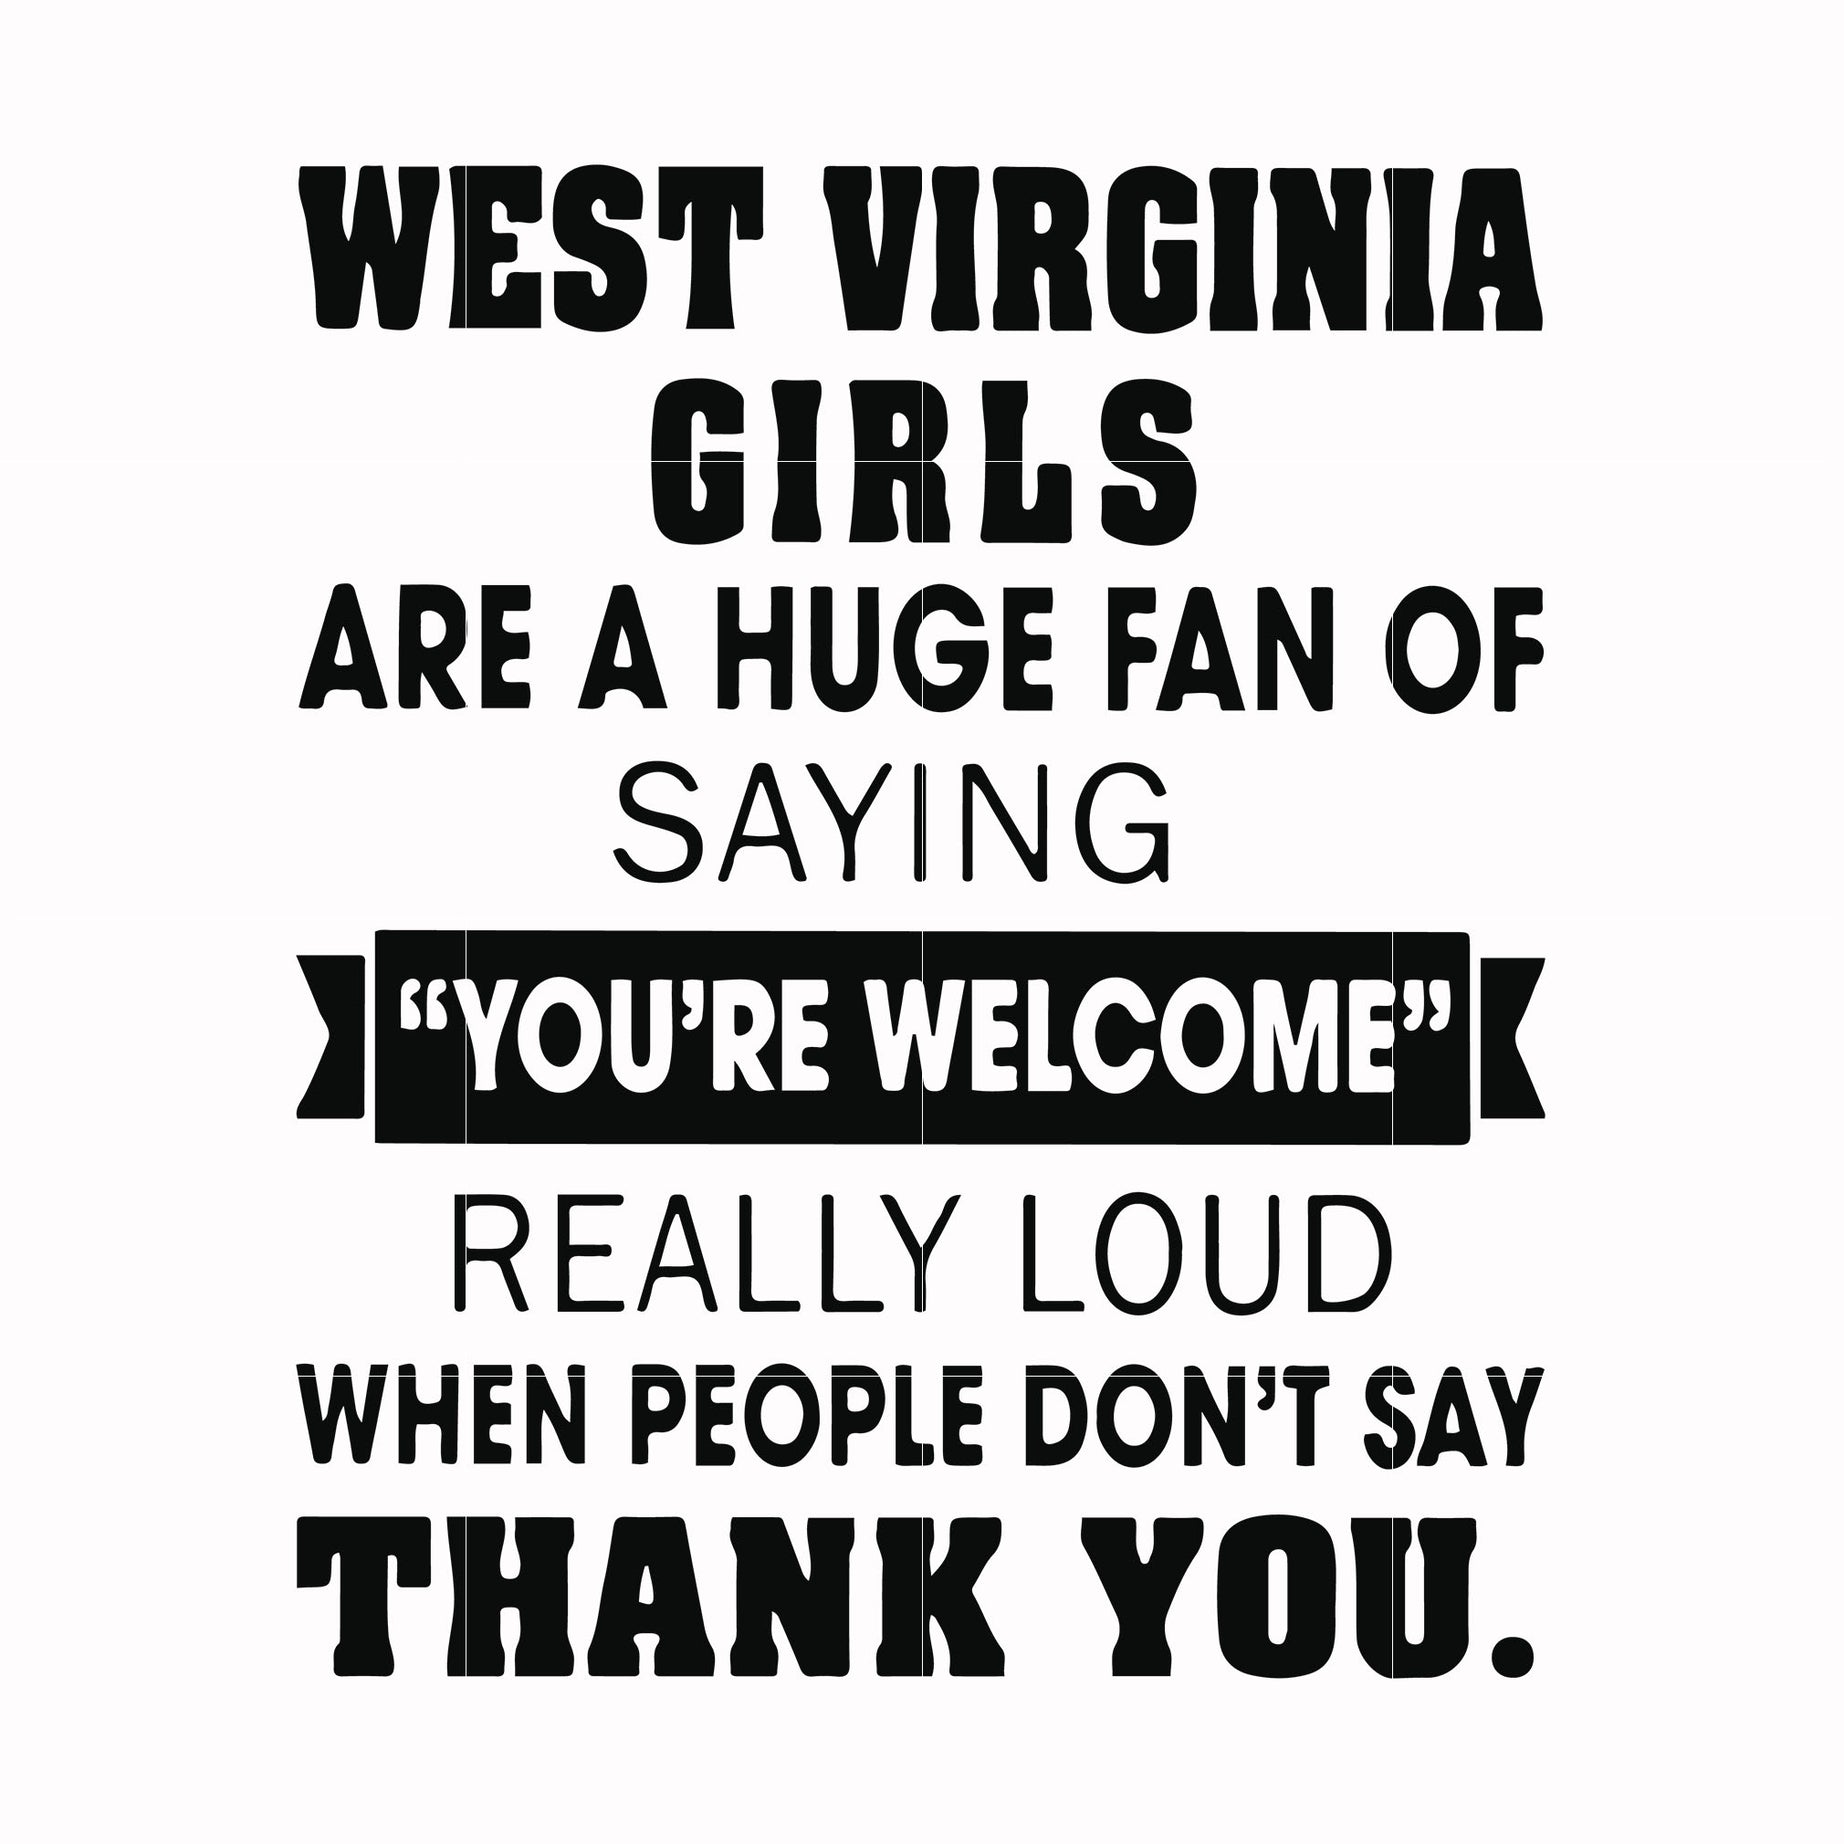 West virginia girls are a huge fan of saying you're welcome really loud when people don't say thank you svg, png, dxf, eps digital file OTH0029